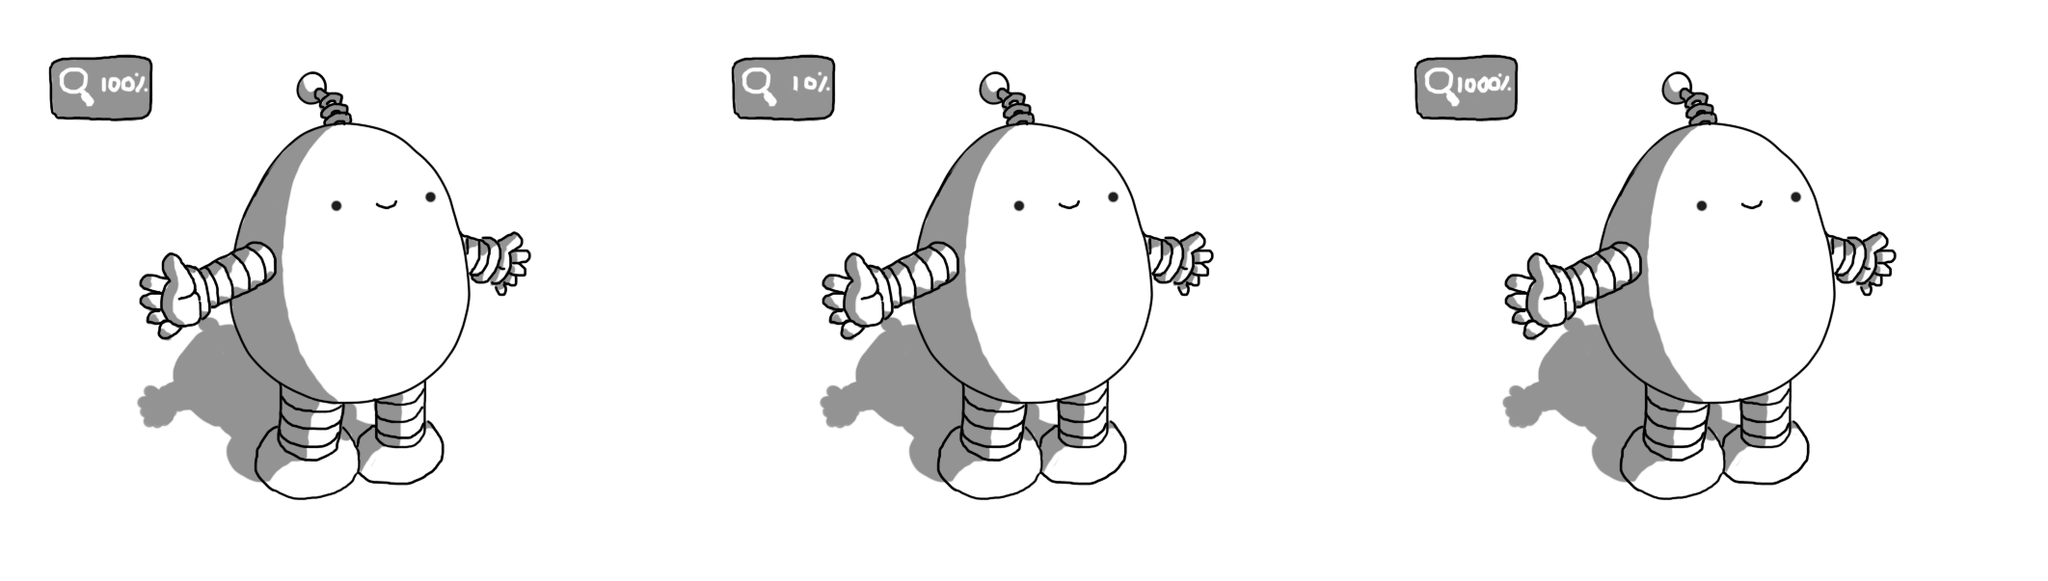 An ovoid robot with banded arms and legs and a coiled antenna. It's standing with its arms spread and a happy expression on its face. The robot is repeated three times, with a small, rounded rectangle to the top left of each, showing a magnifying glass. From left to right, the boxes are labelled "100%", "10%" and "1000%". The image is identical for each magnification.